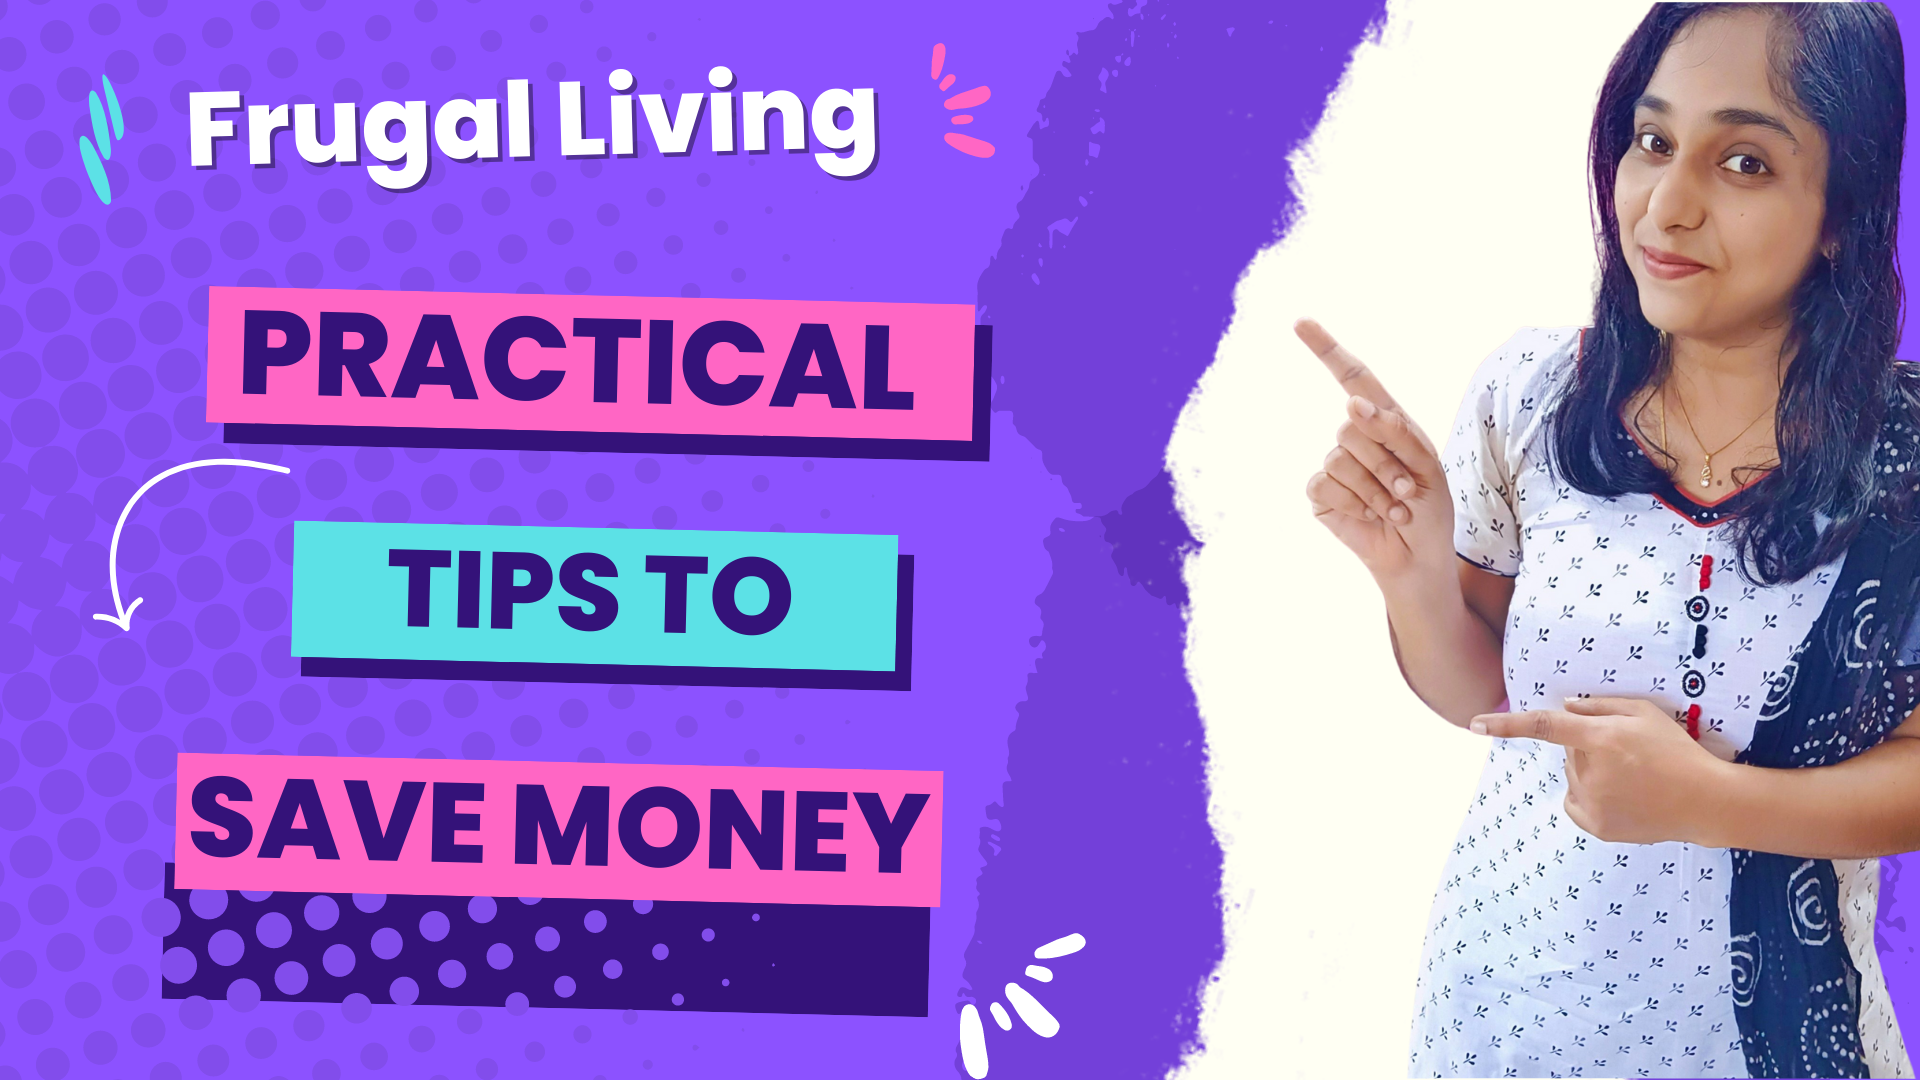 Frugal Living Tips: How To Save Money By Making Small LifeStyle Changes?